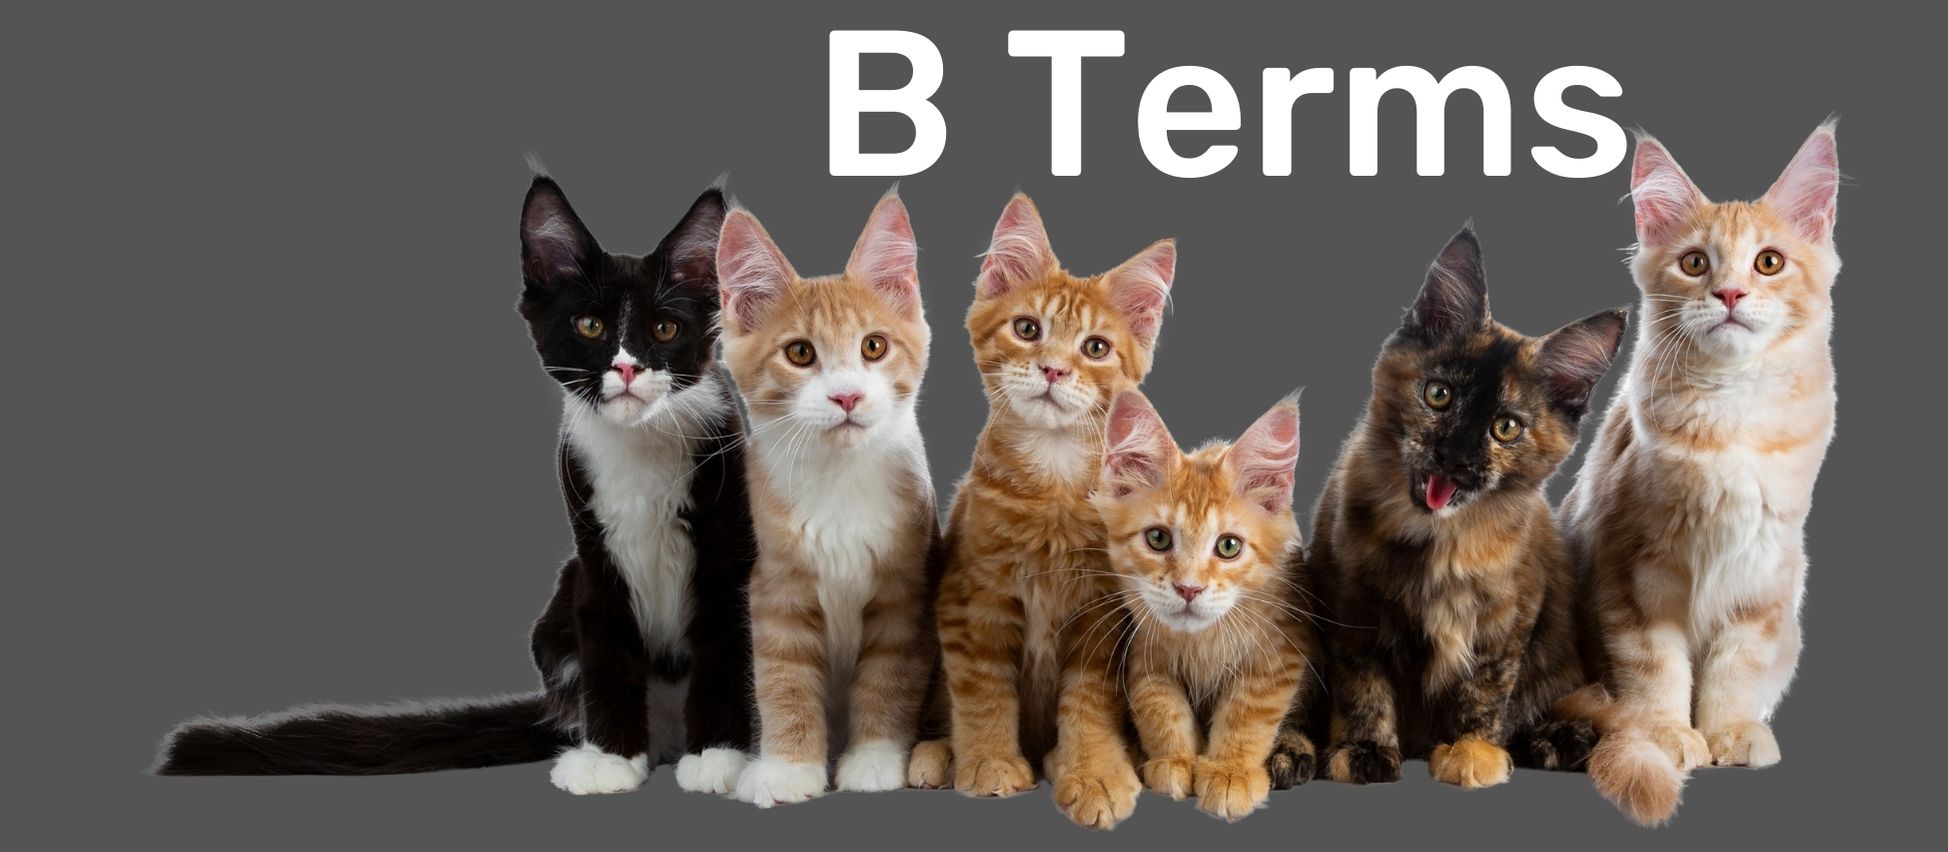 Group of six cats in front of a gray background with text reading 'B Terms' at the top to indicate a new section of the glossary